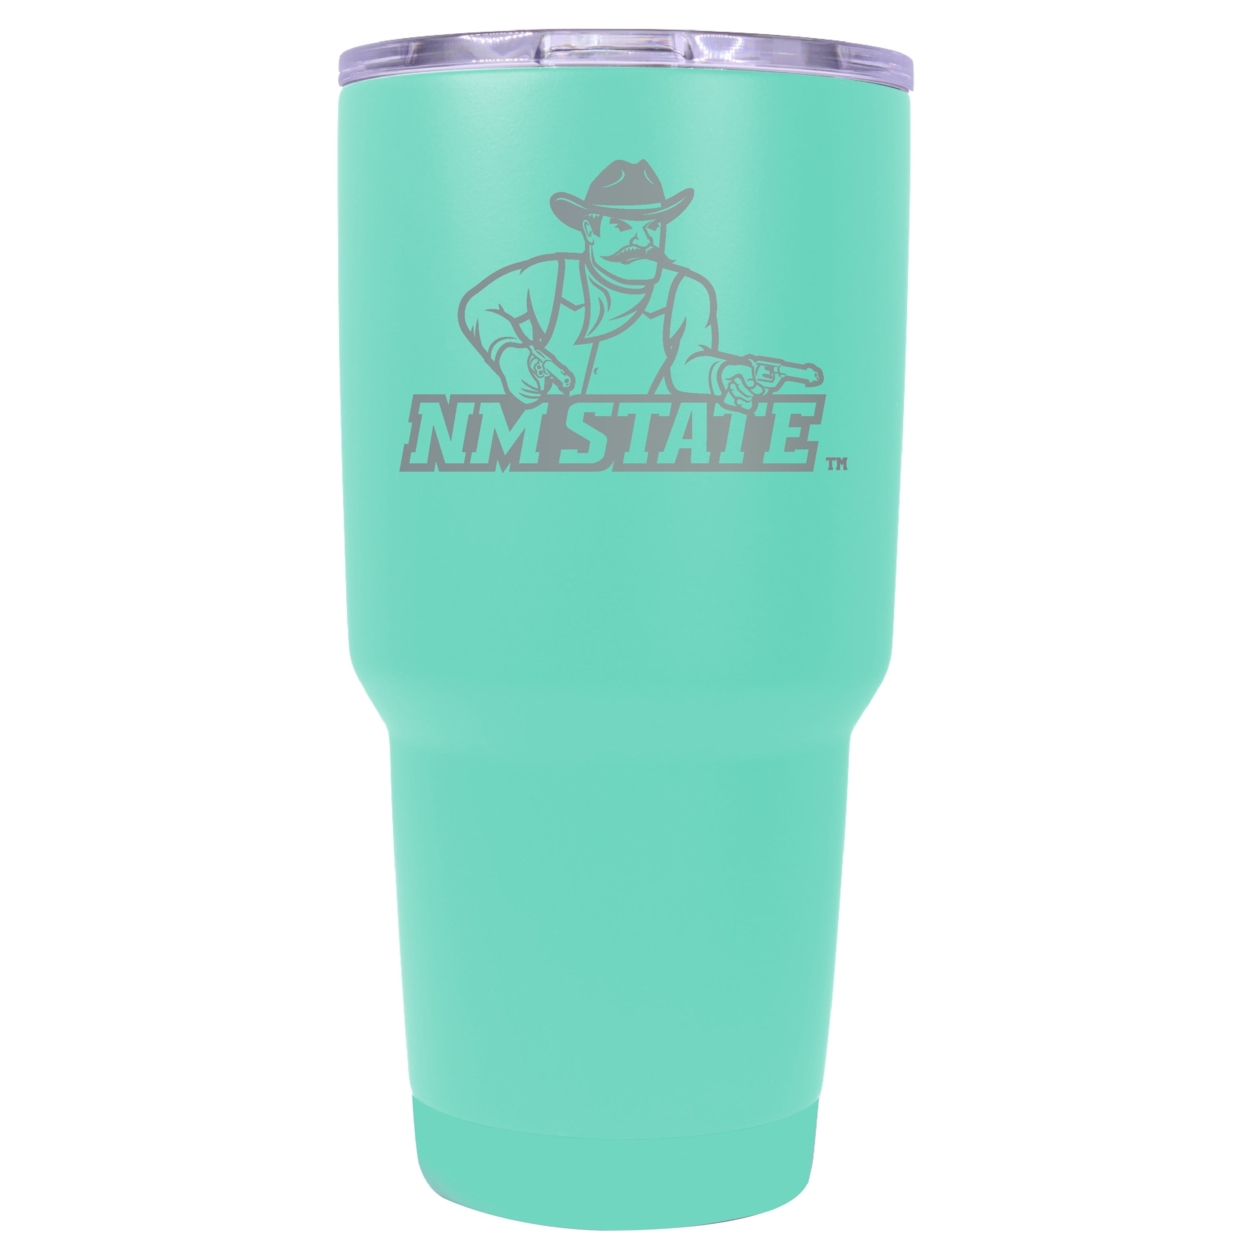 New Mexico State University Pistol Pete 24 Oz Laser Engraved Stainless Steel Insulated Tumbler - Choose Your Color. - Navy